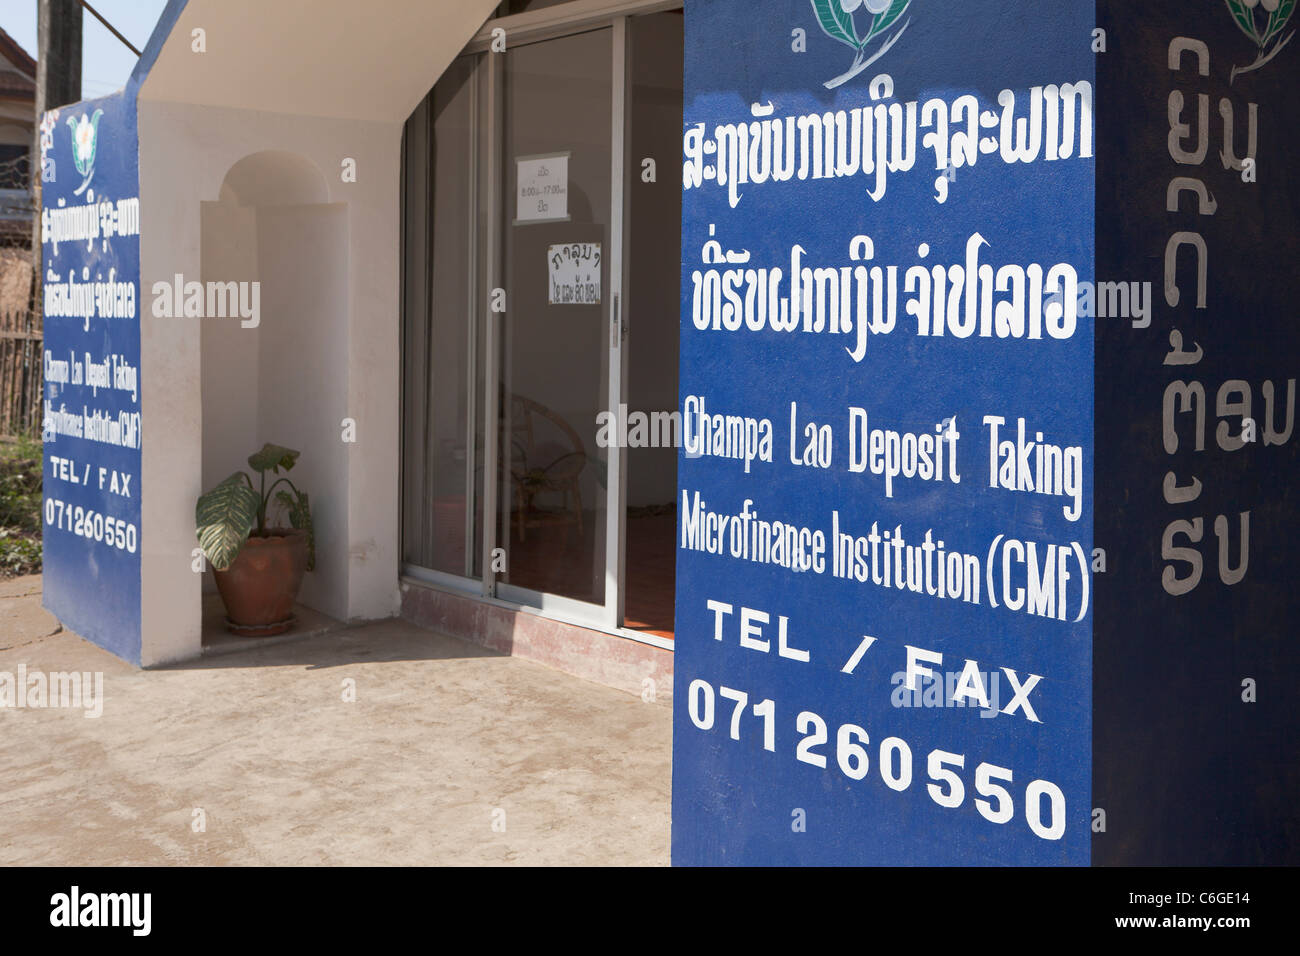 Micro finance institution branch in Luang Prabang, Laos Stock Photo